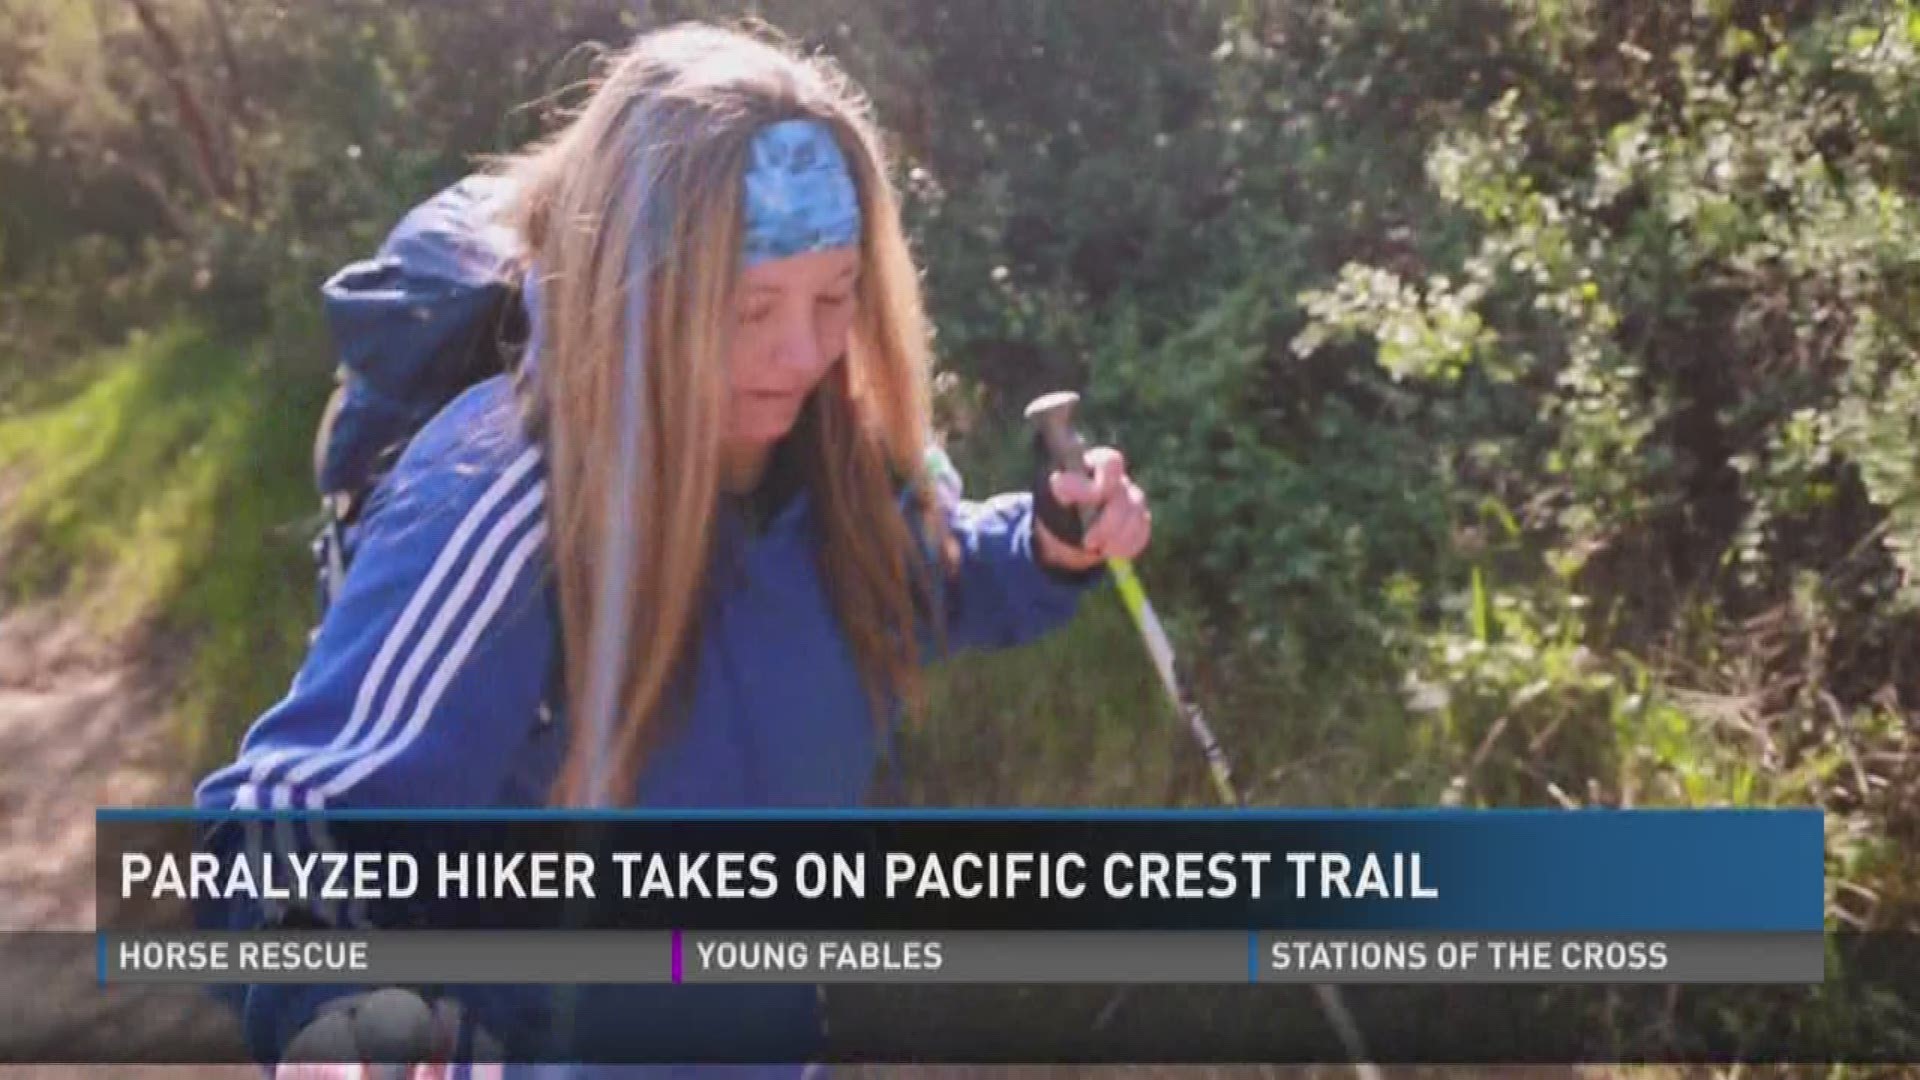 April 14, 2017: The paralyzed hiker who completed the Appalachian Trail is now walking from the U.S. Mexico border to the Canadian border.